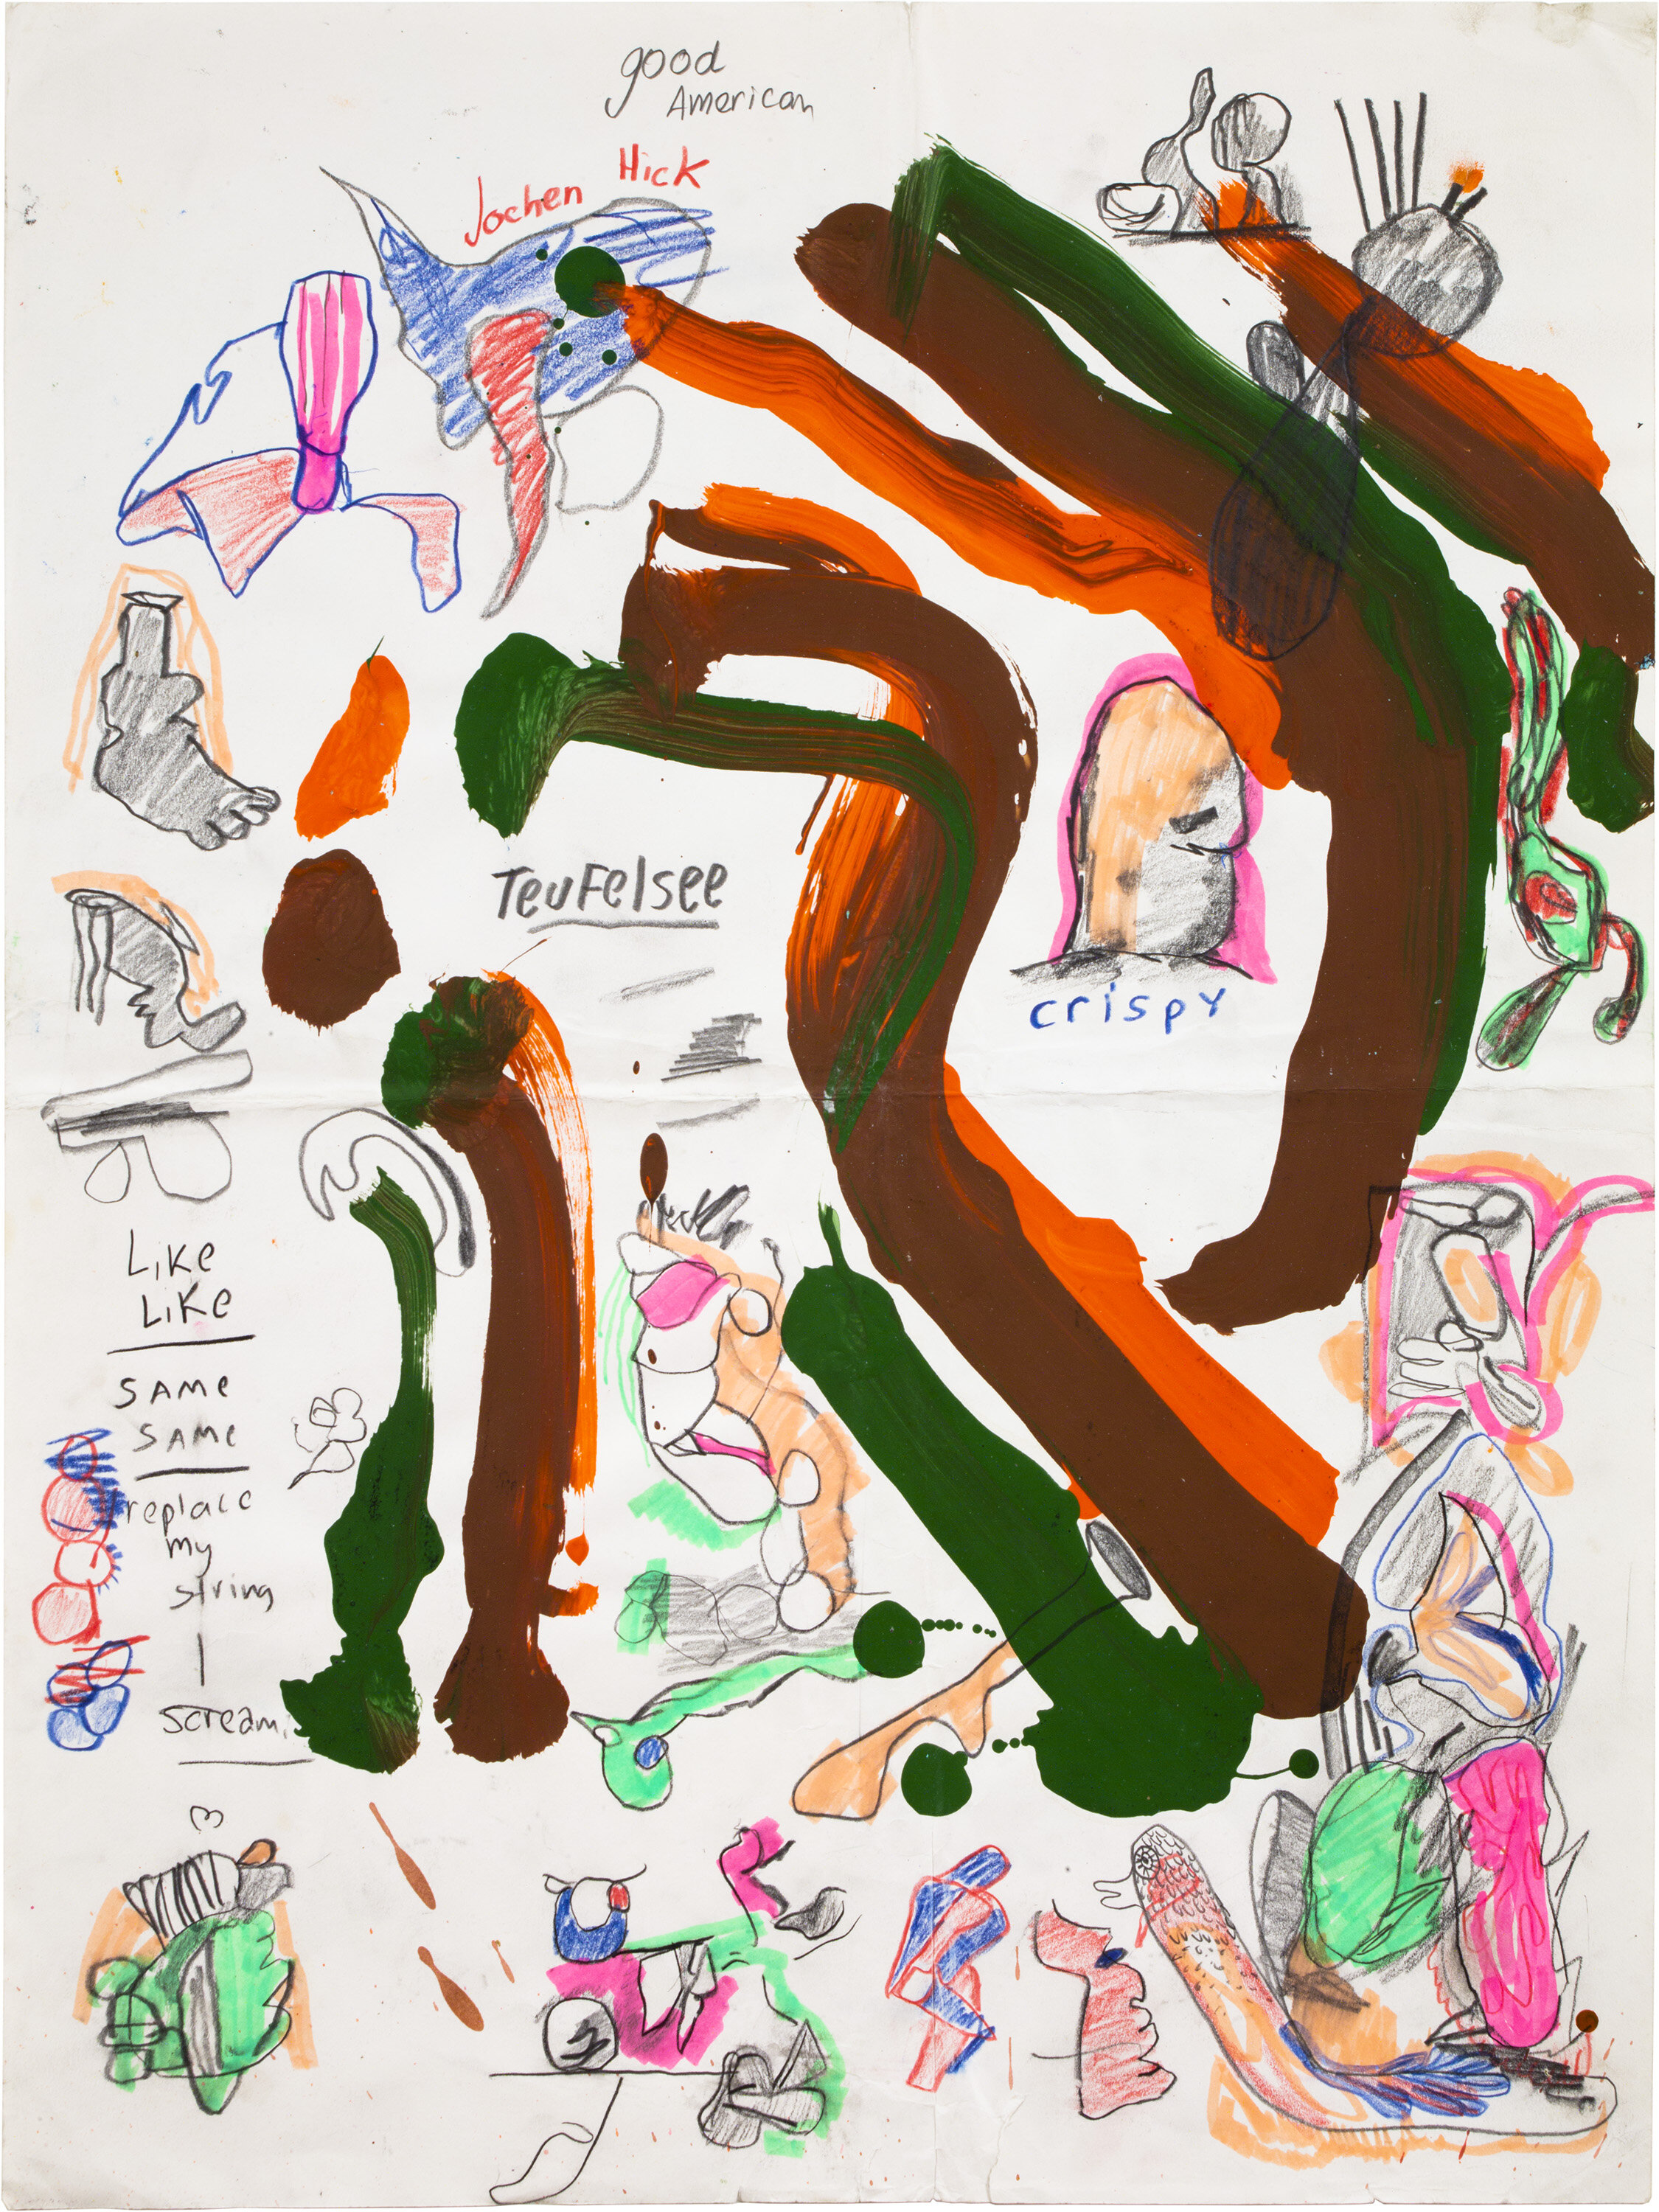  Drew Beattie and Ben Shepard   DBBS-DRW-2019-192   2019 acrylic, marker, crayon and pencil on paper  24 x 18 inches 